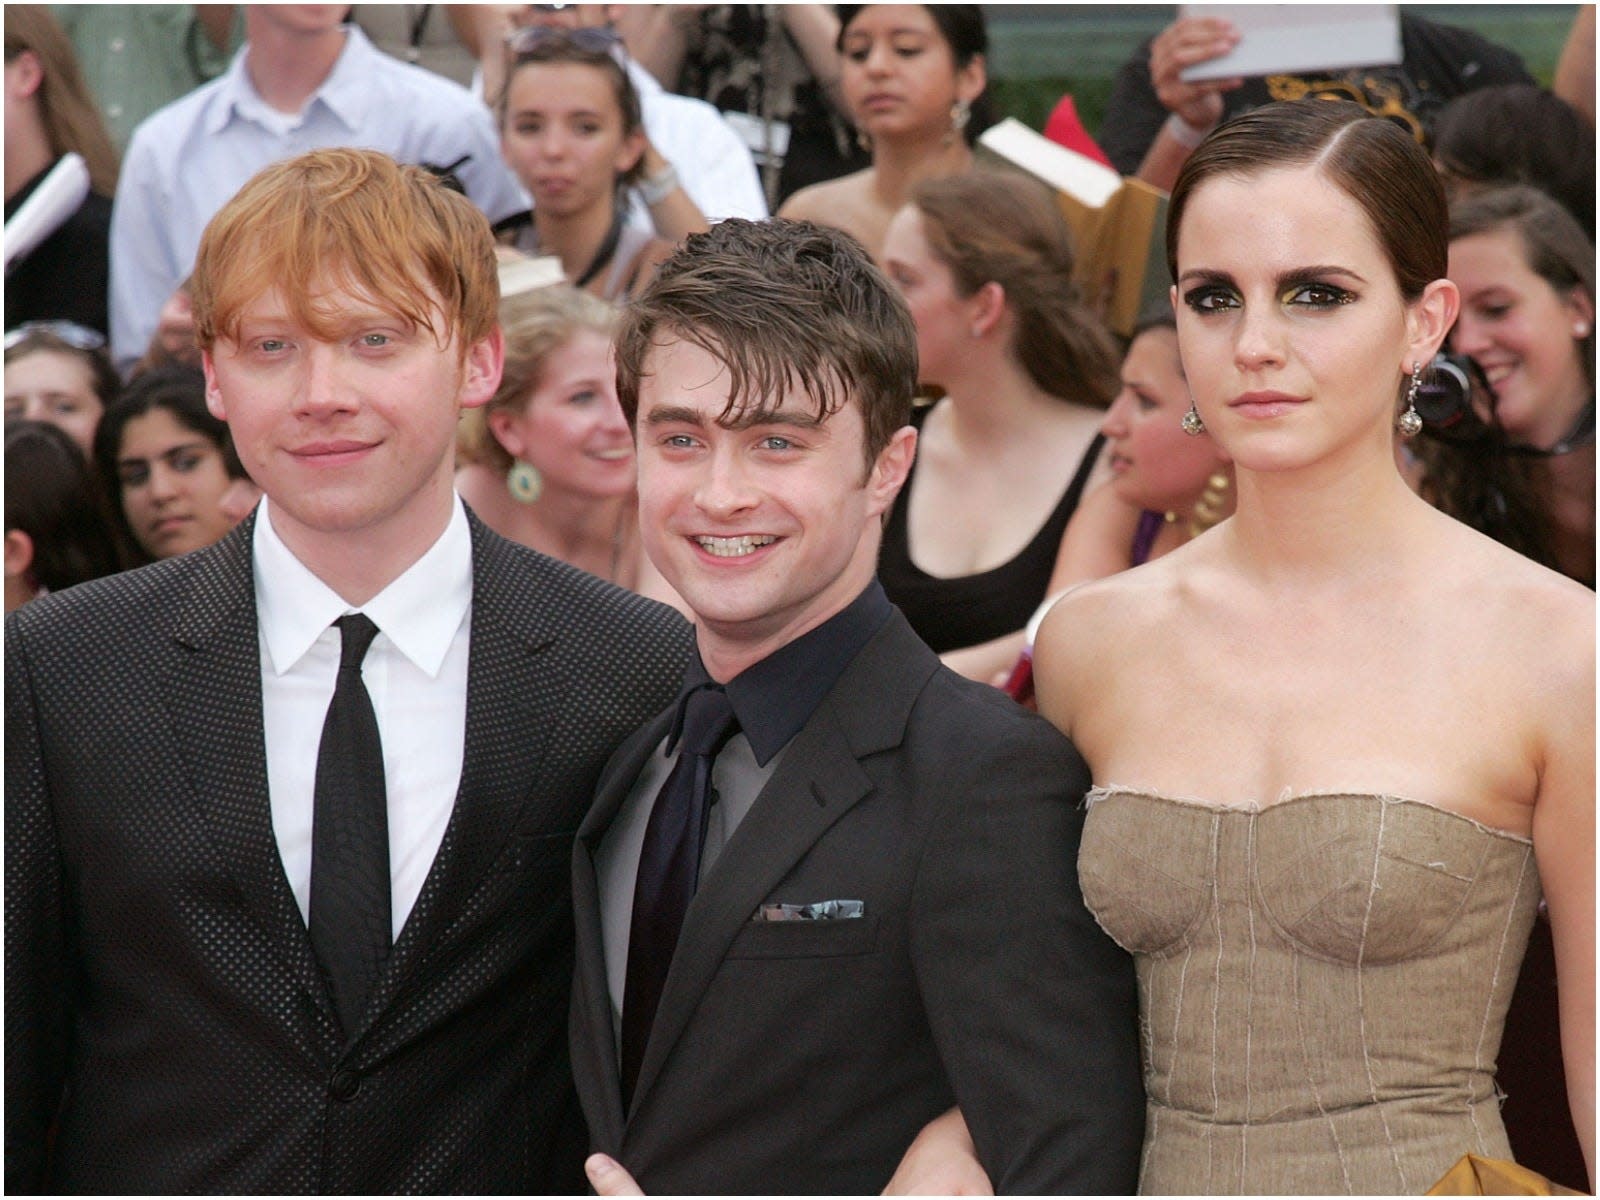 Rupert Grint says fame is the one thing he, Emma Watson, and Daniel Radcliffe never talk about